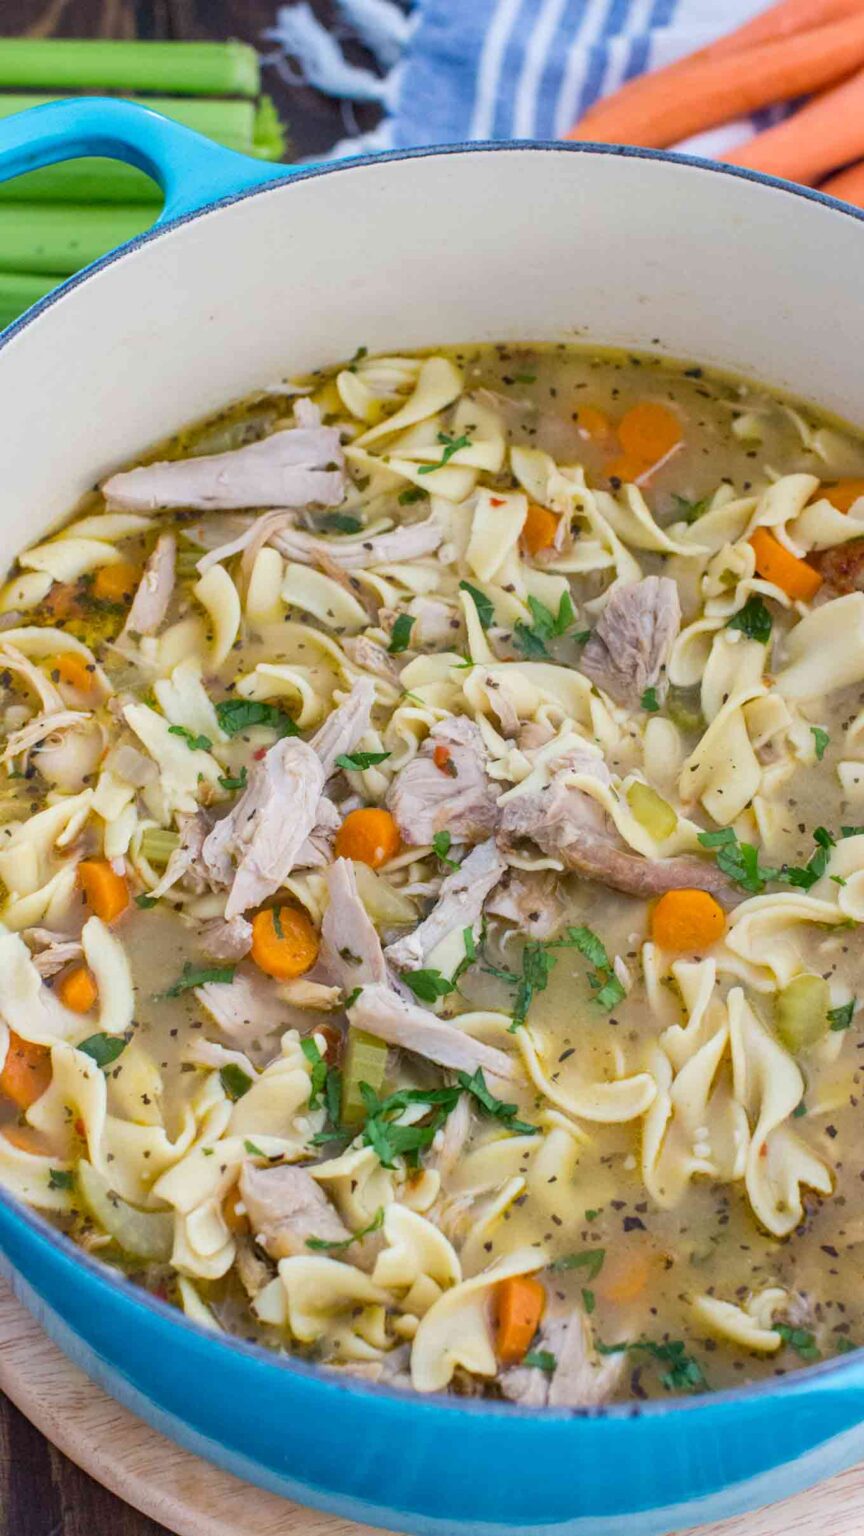 Homemade Chicken Noodle Soup [VIDEO] - S&SM